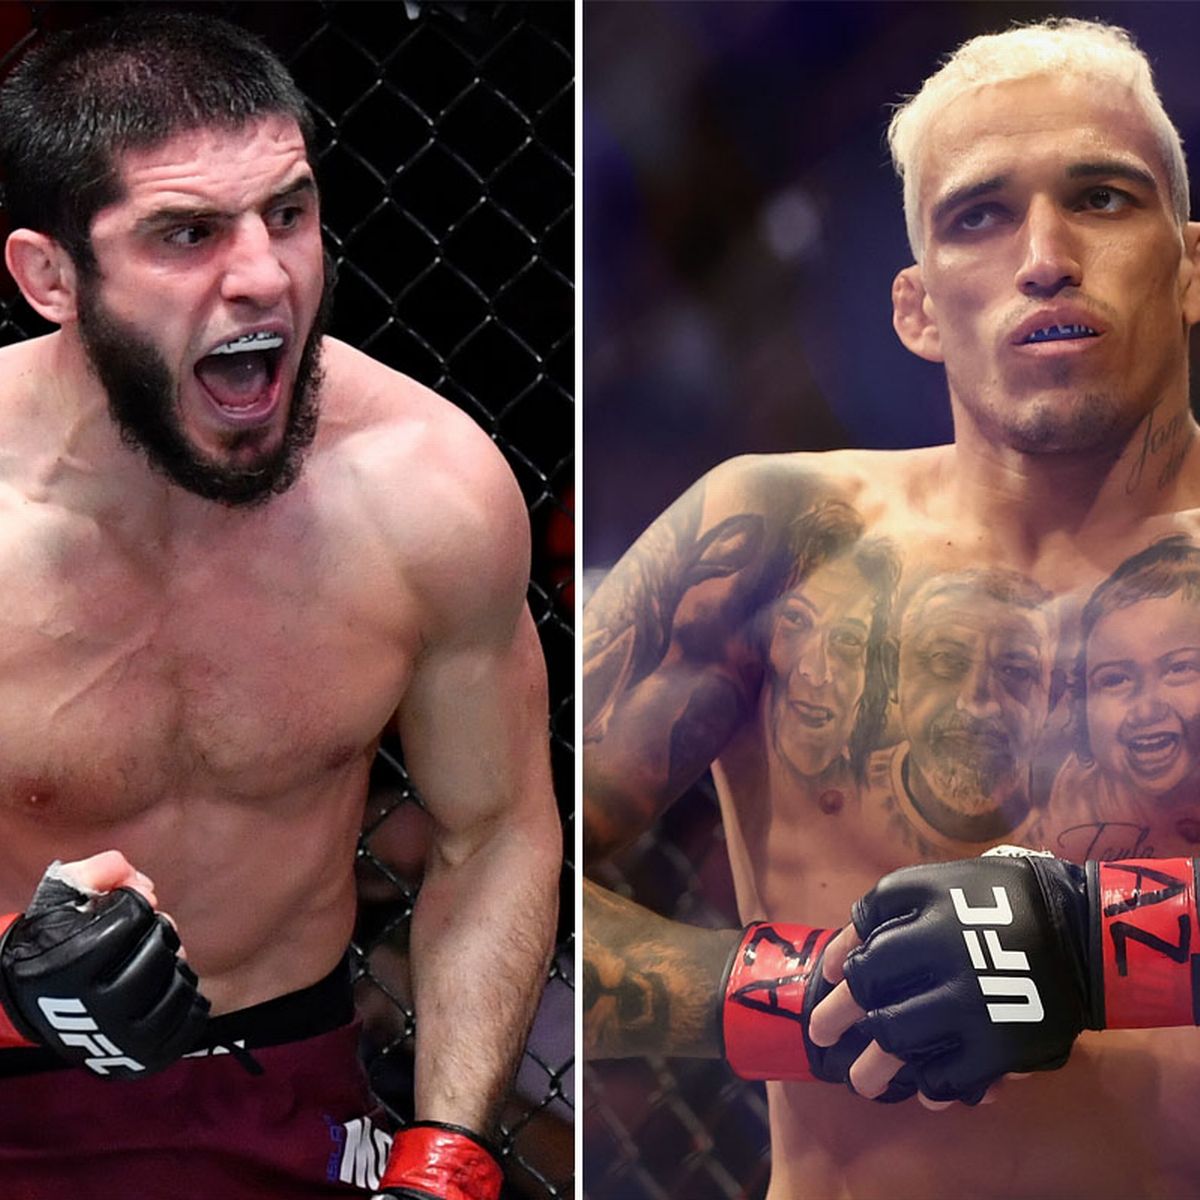 UFC 280: Khabib Nurmagomedov's disciple Islam Makhachev insults Charles Oliveira for picking Conor McGregor and Nate Diaz," won like five years ago"